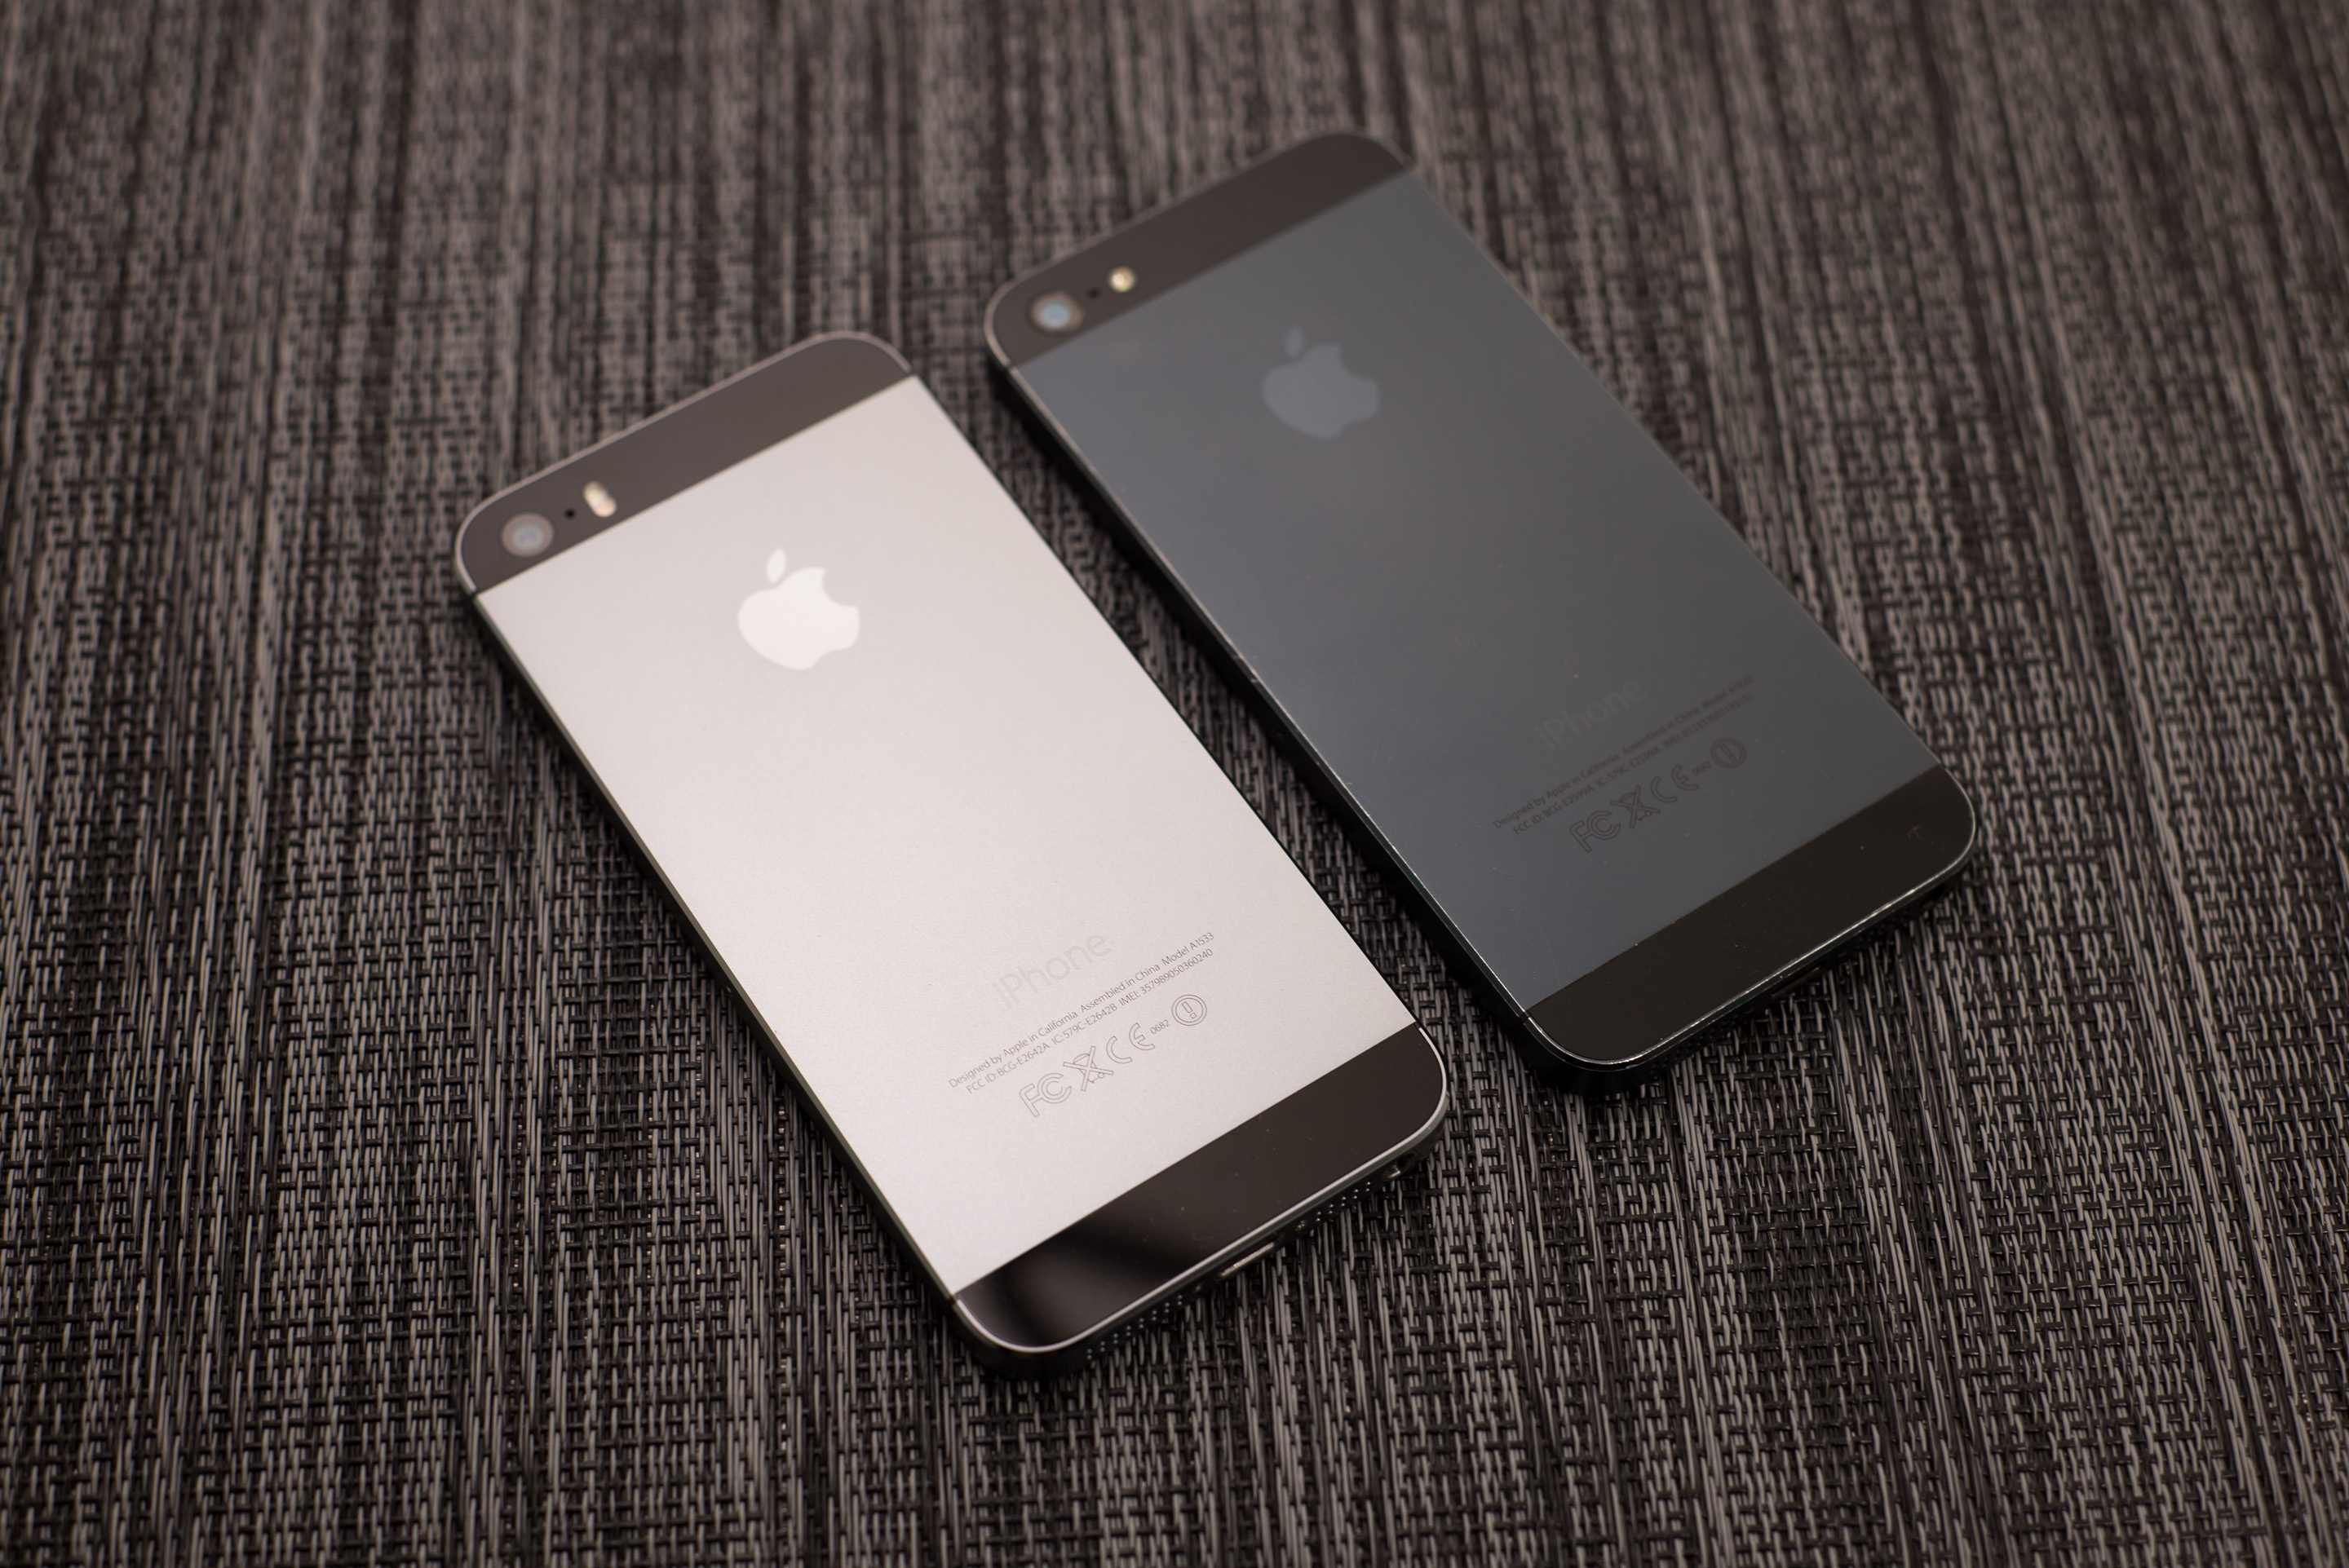 Final Words - The iPhone 5s Review